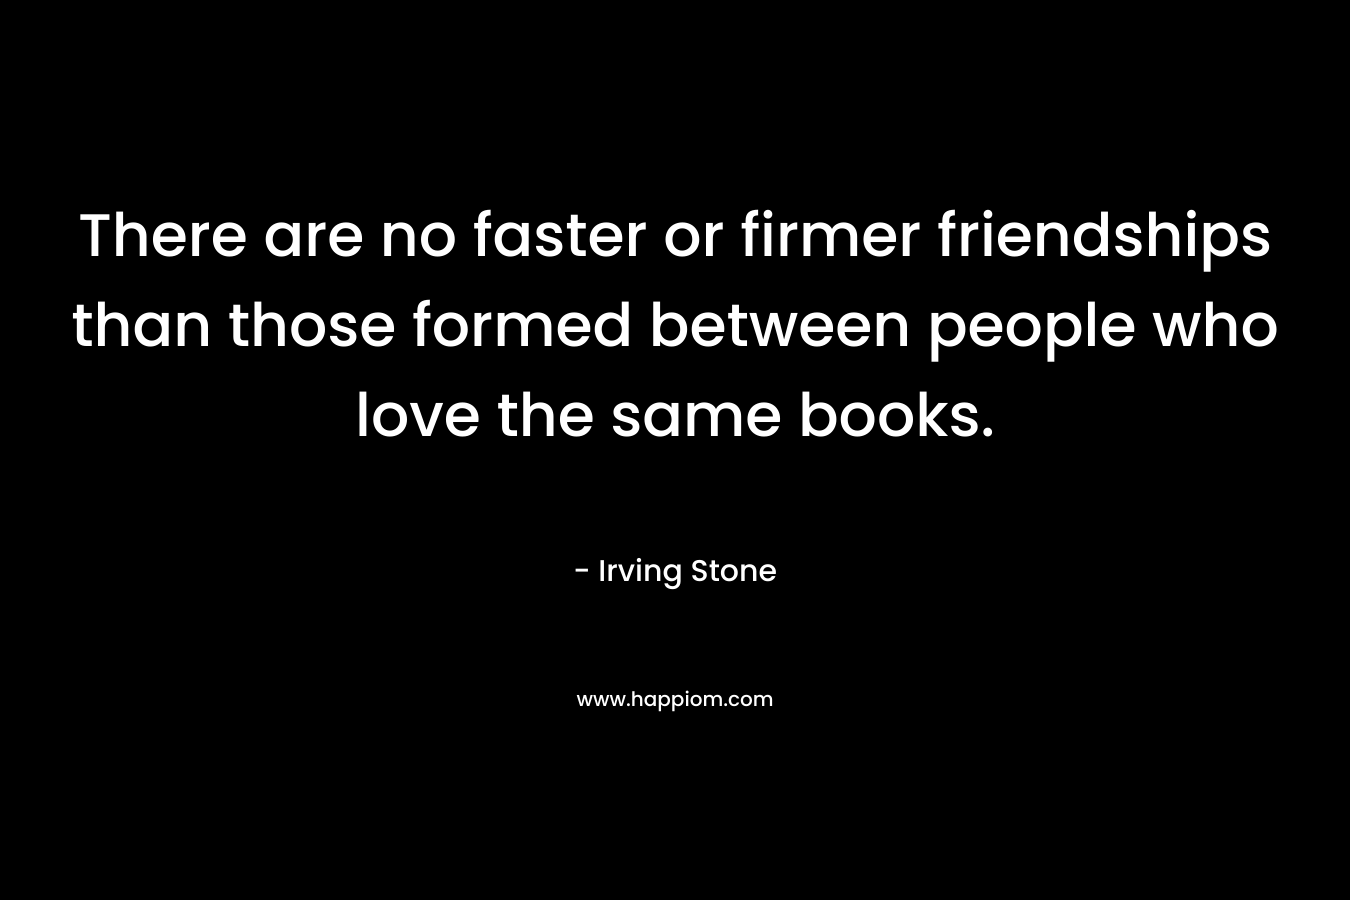 There are no faster or firmer friendships than those formed between people who love the same books.